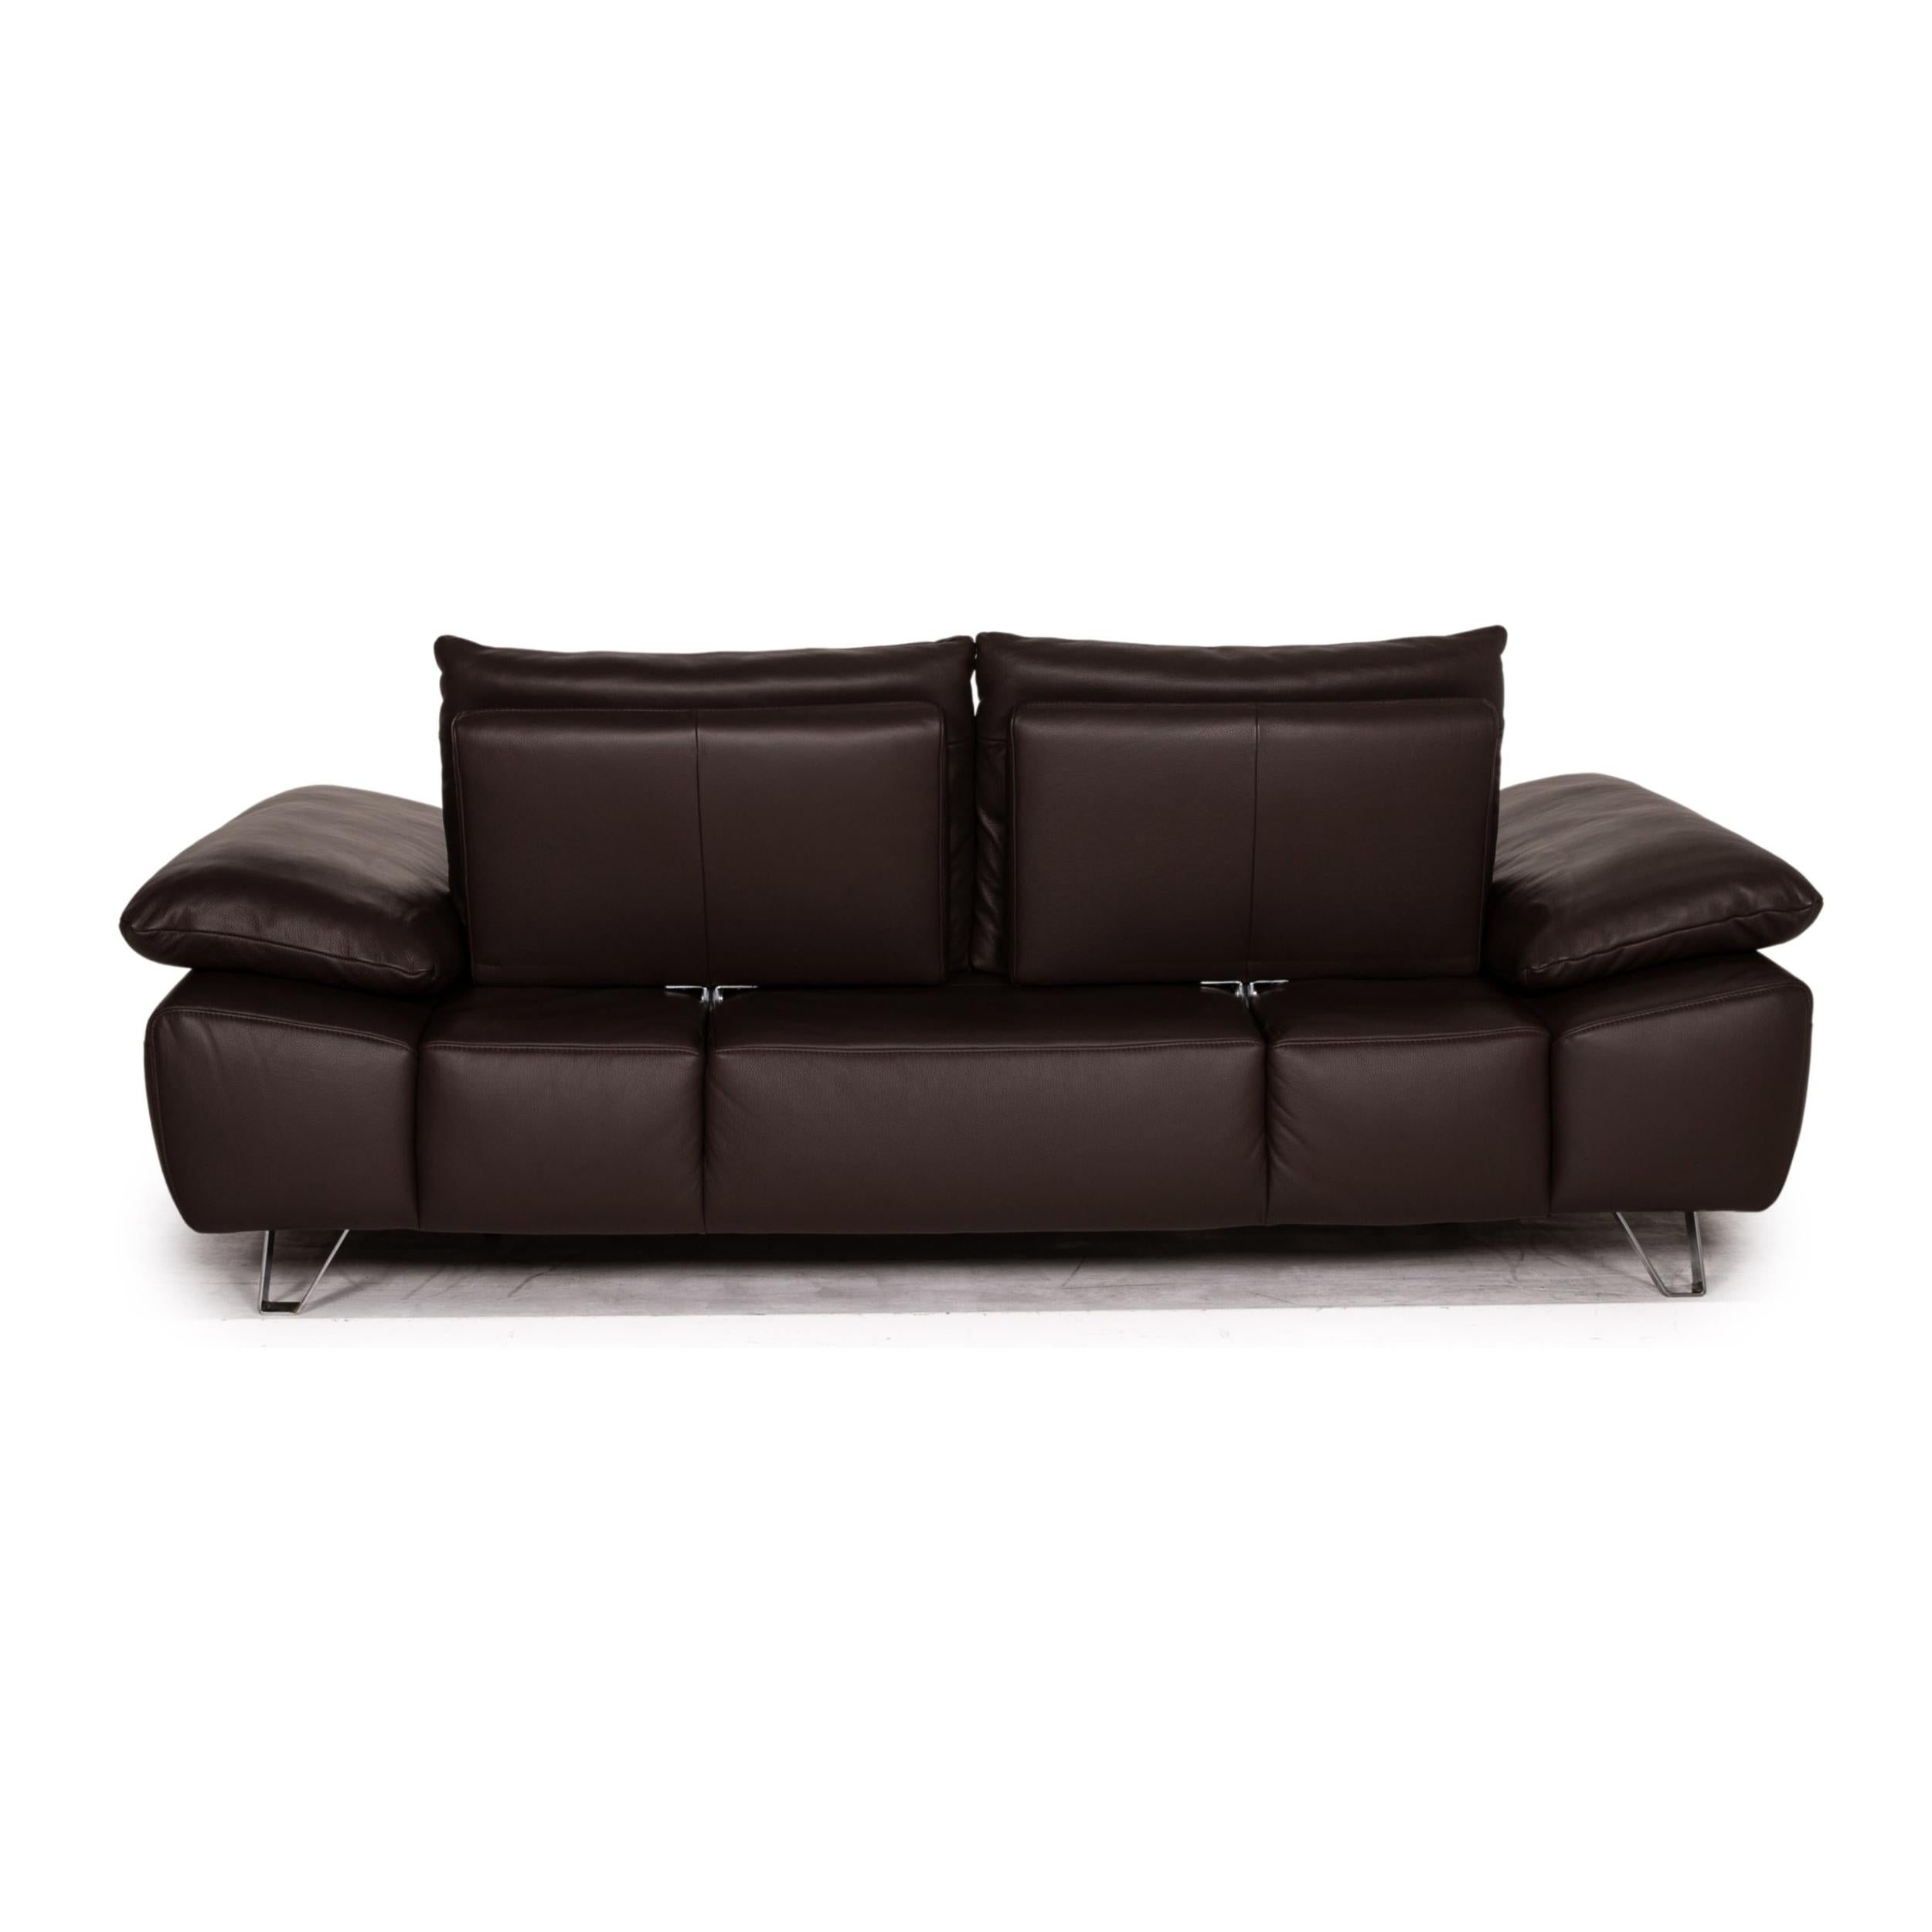 Musterring MR 680 Two-Seater Sofa Brown Leather Couch Function 5